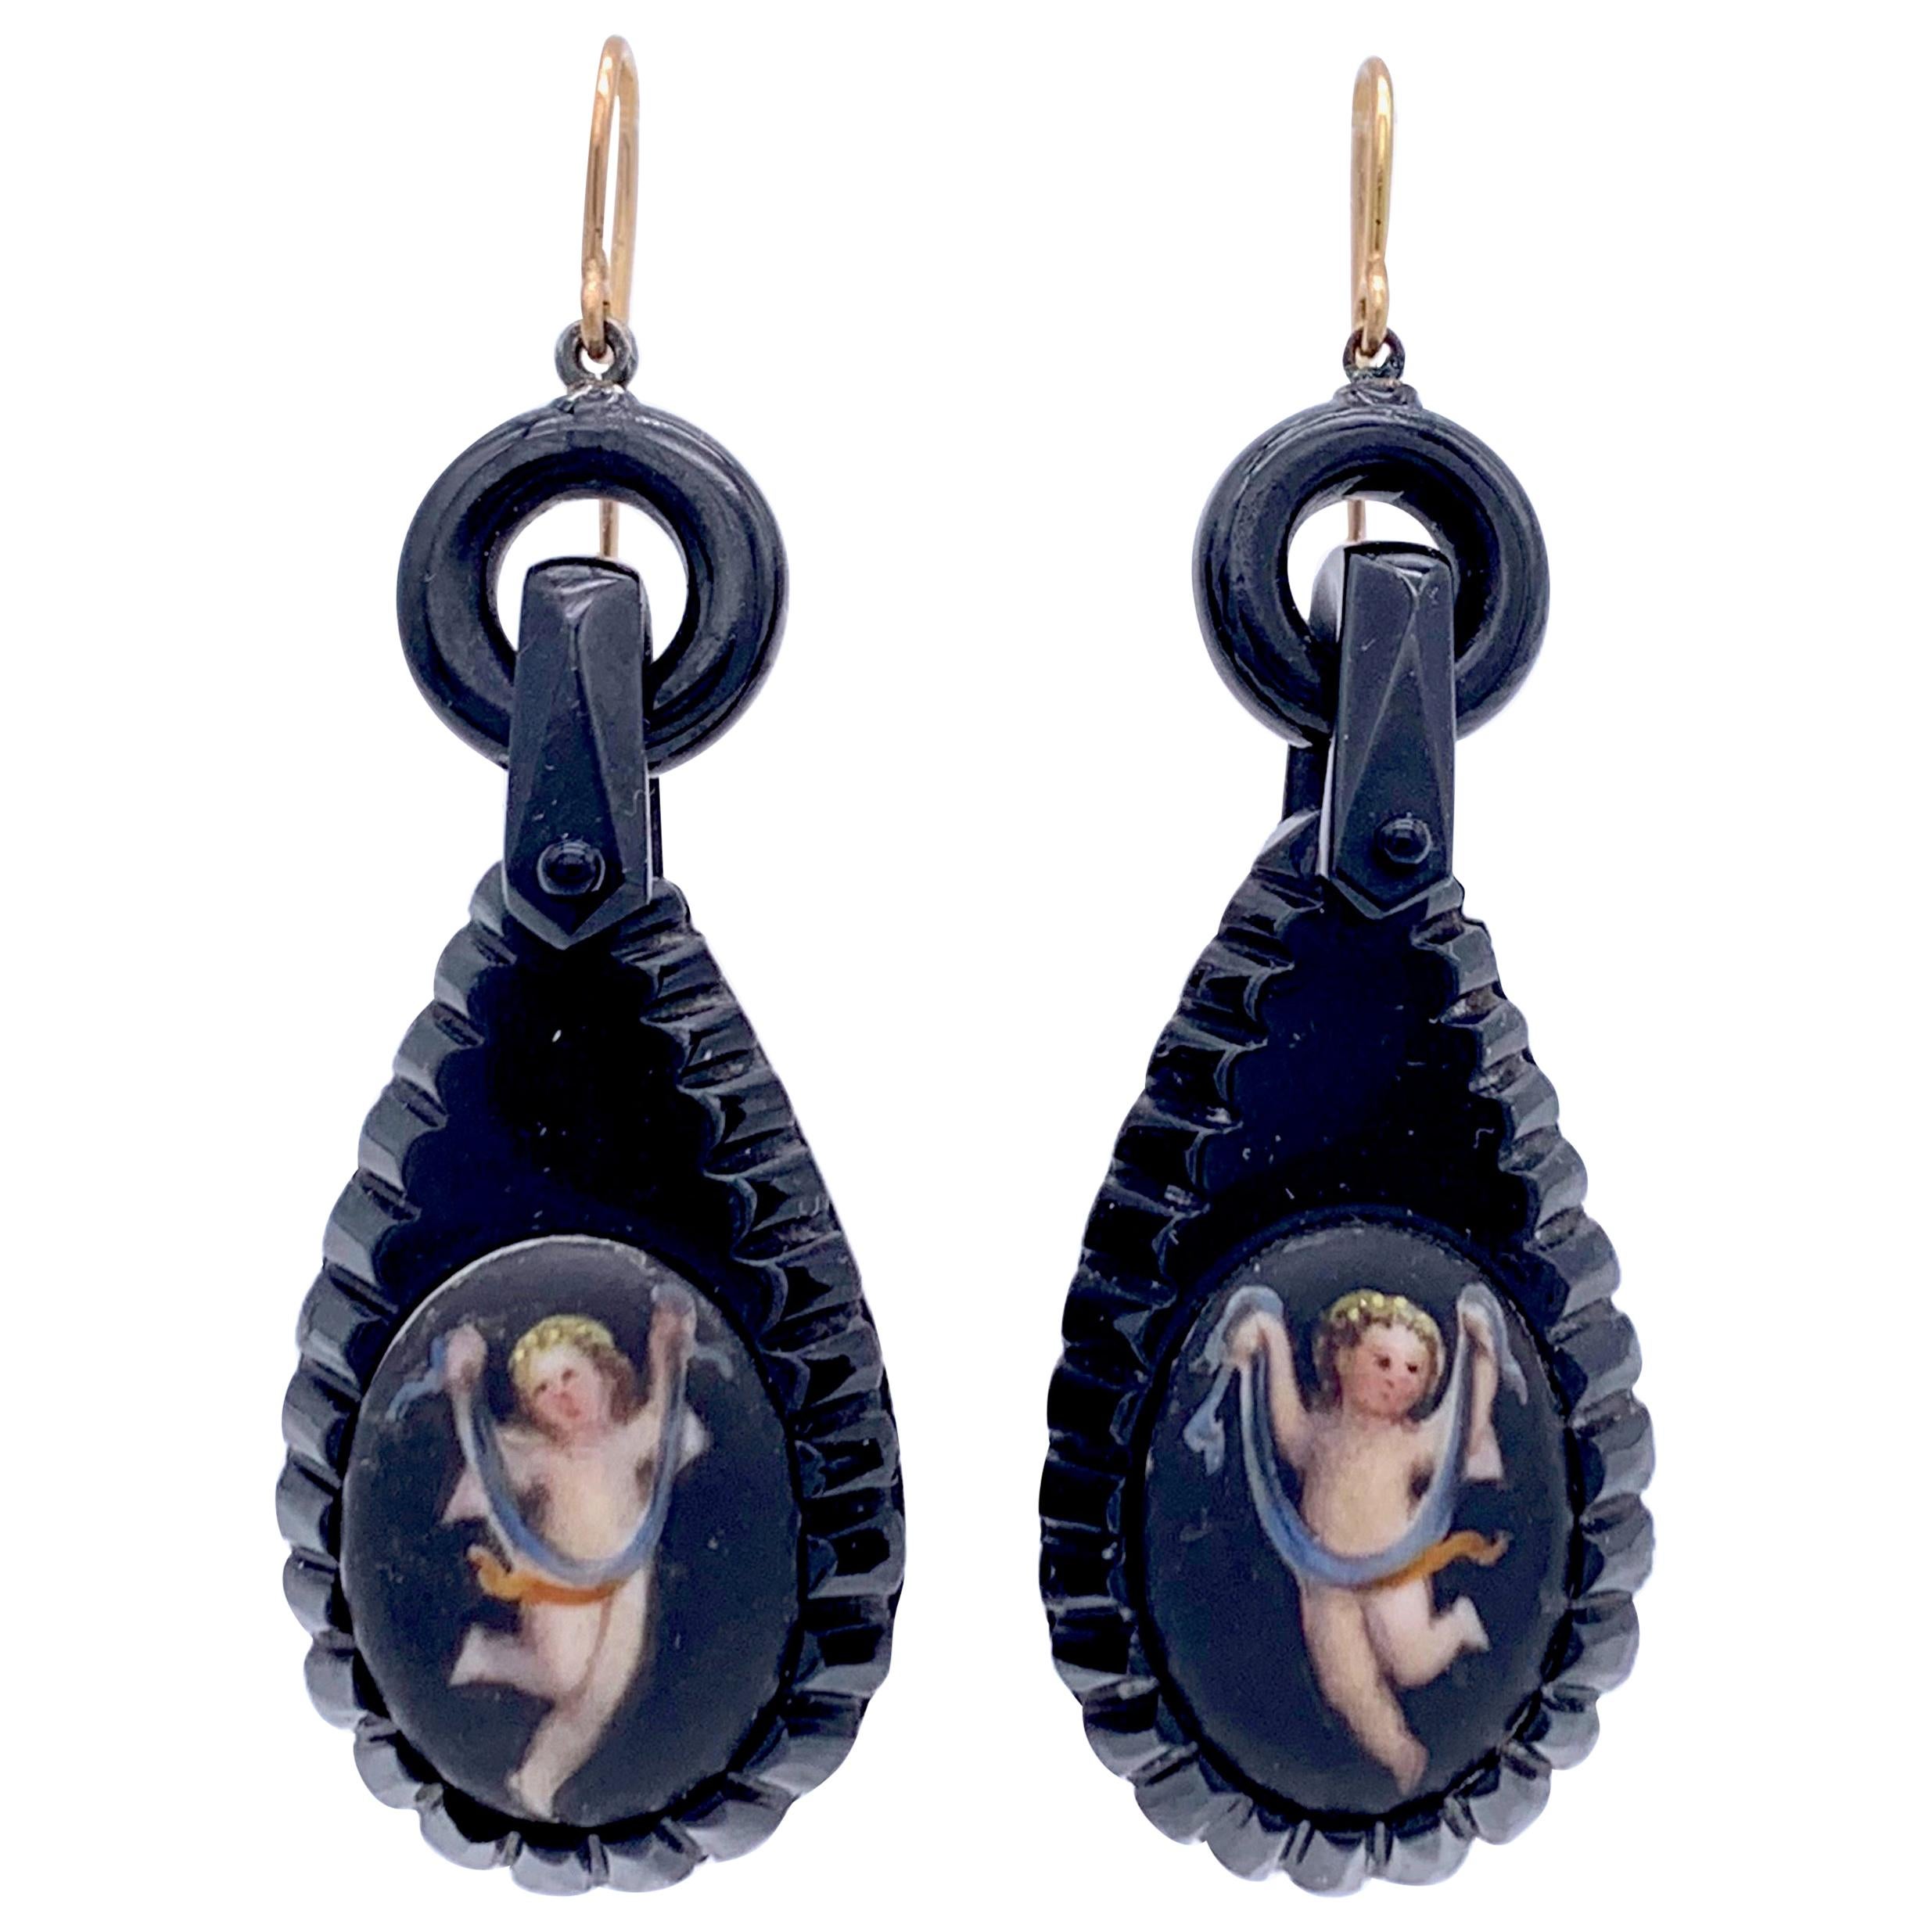 Antique Carved Whitby Jet Earrings Dancing Cupids Putti Garlands Gold Porcelain